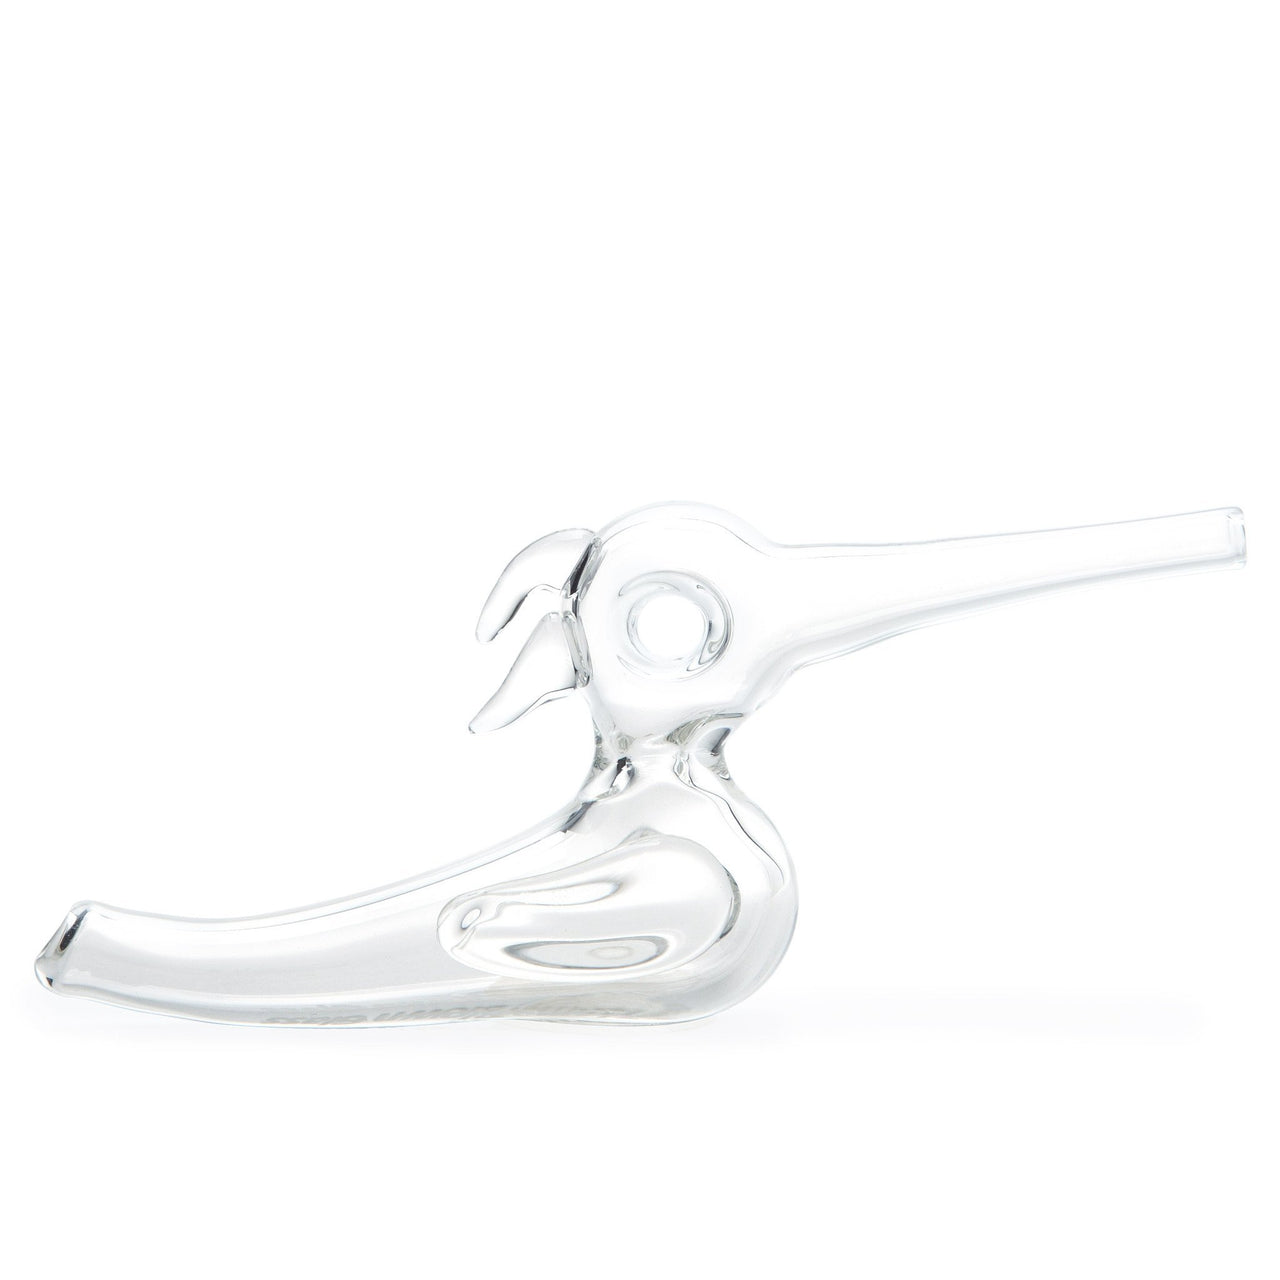 Home Blown Glass 'The Bird' Air-Cooled Dry Rig - 420 Science - The most trusted online smoke shop.